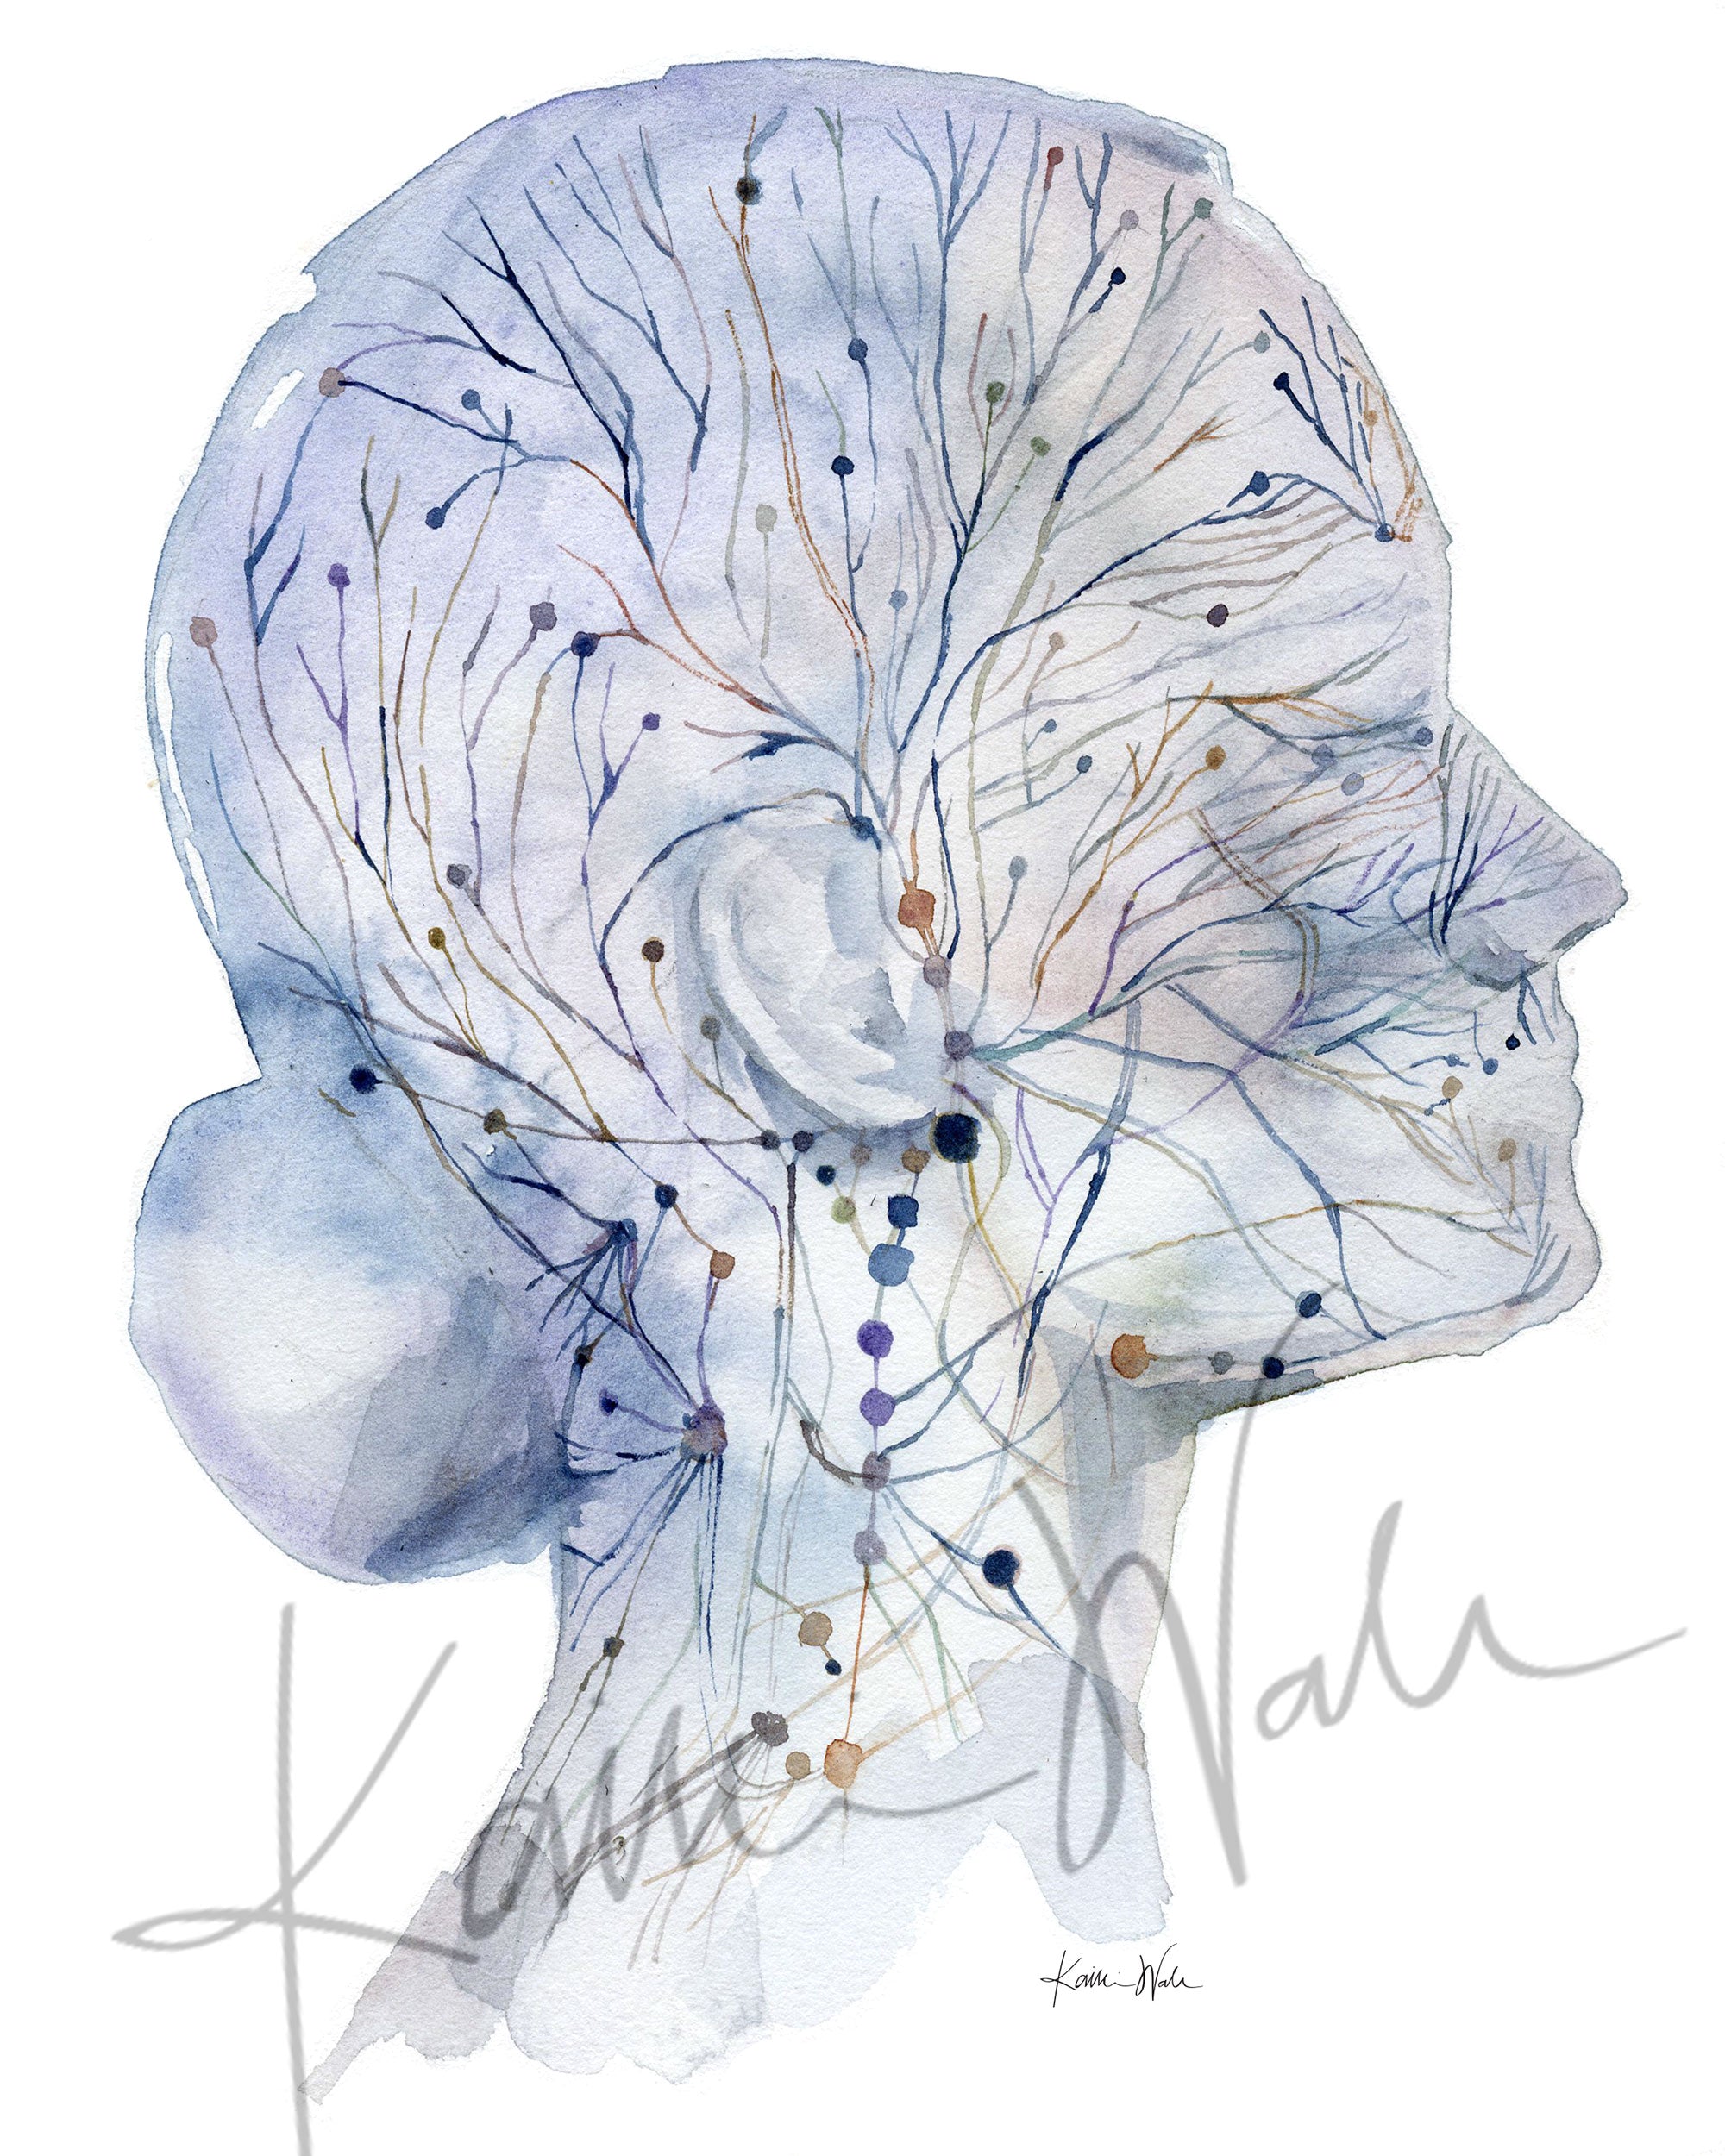 Unframed watercolor painting of a head and neck showing the lymphatic system.